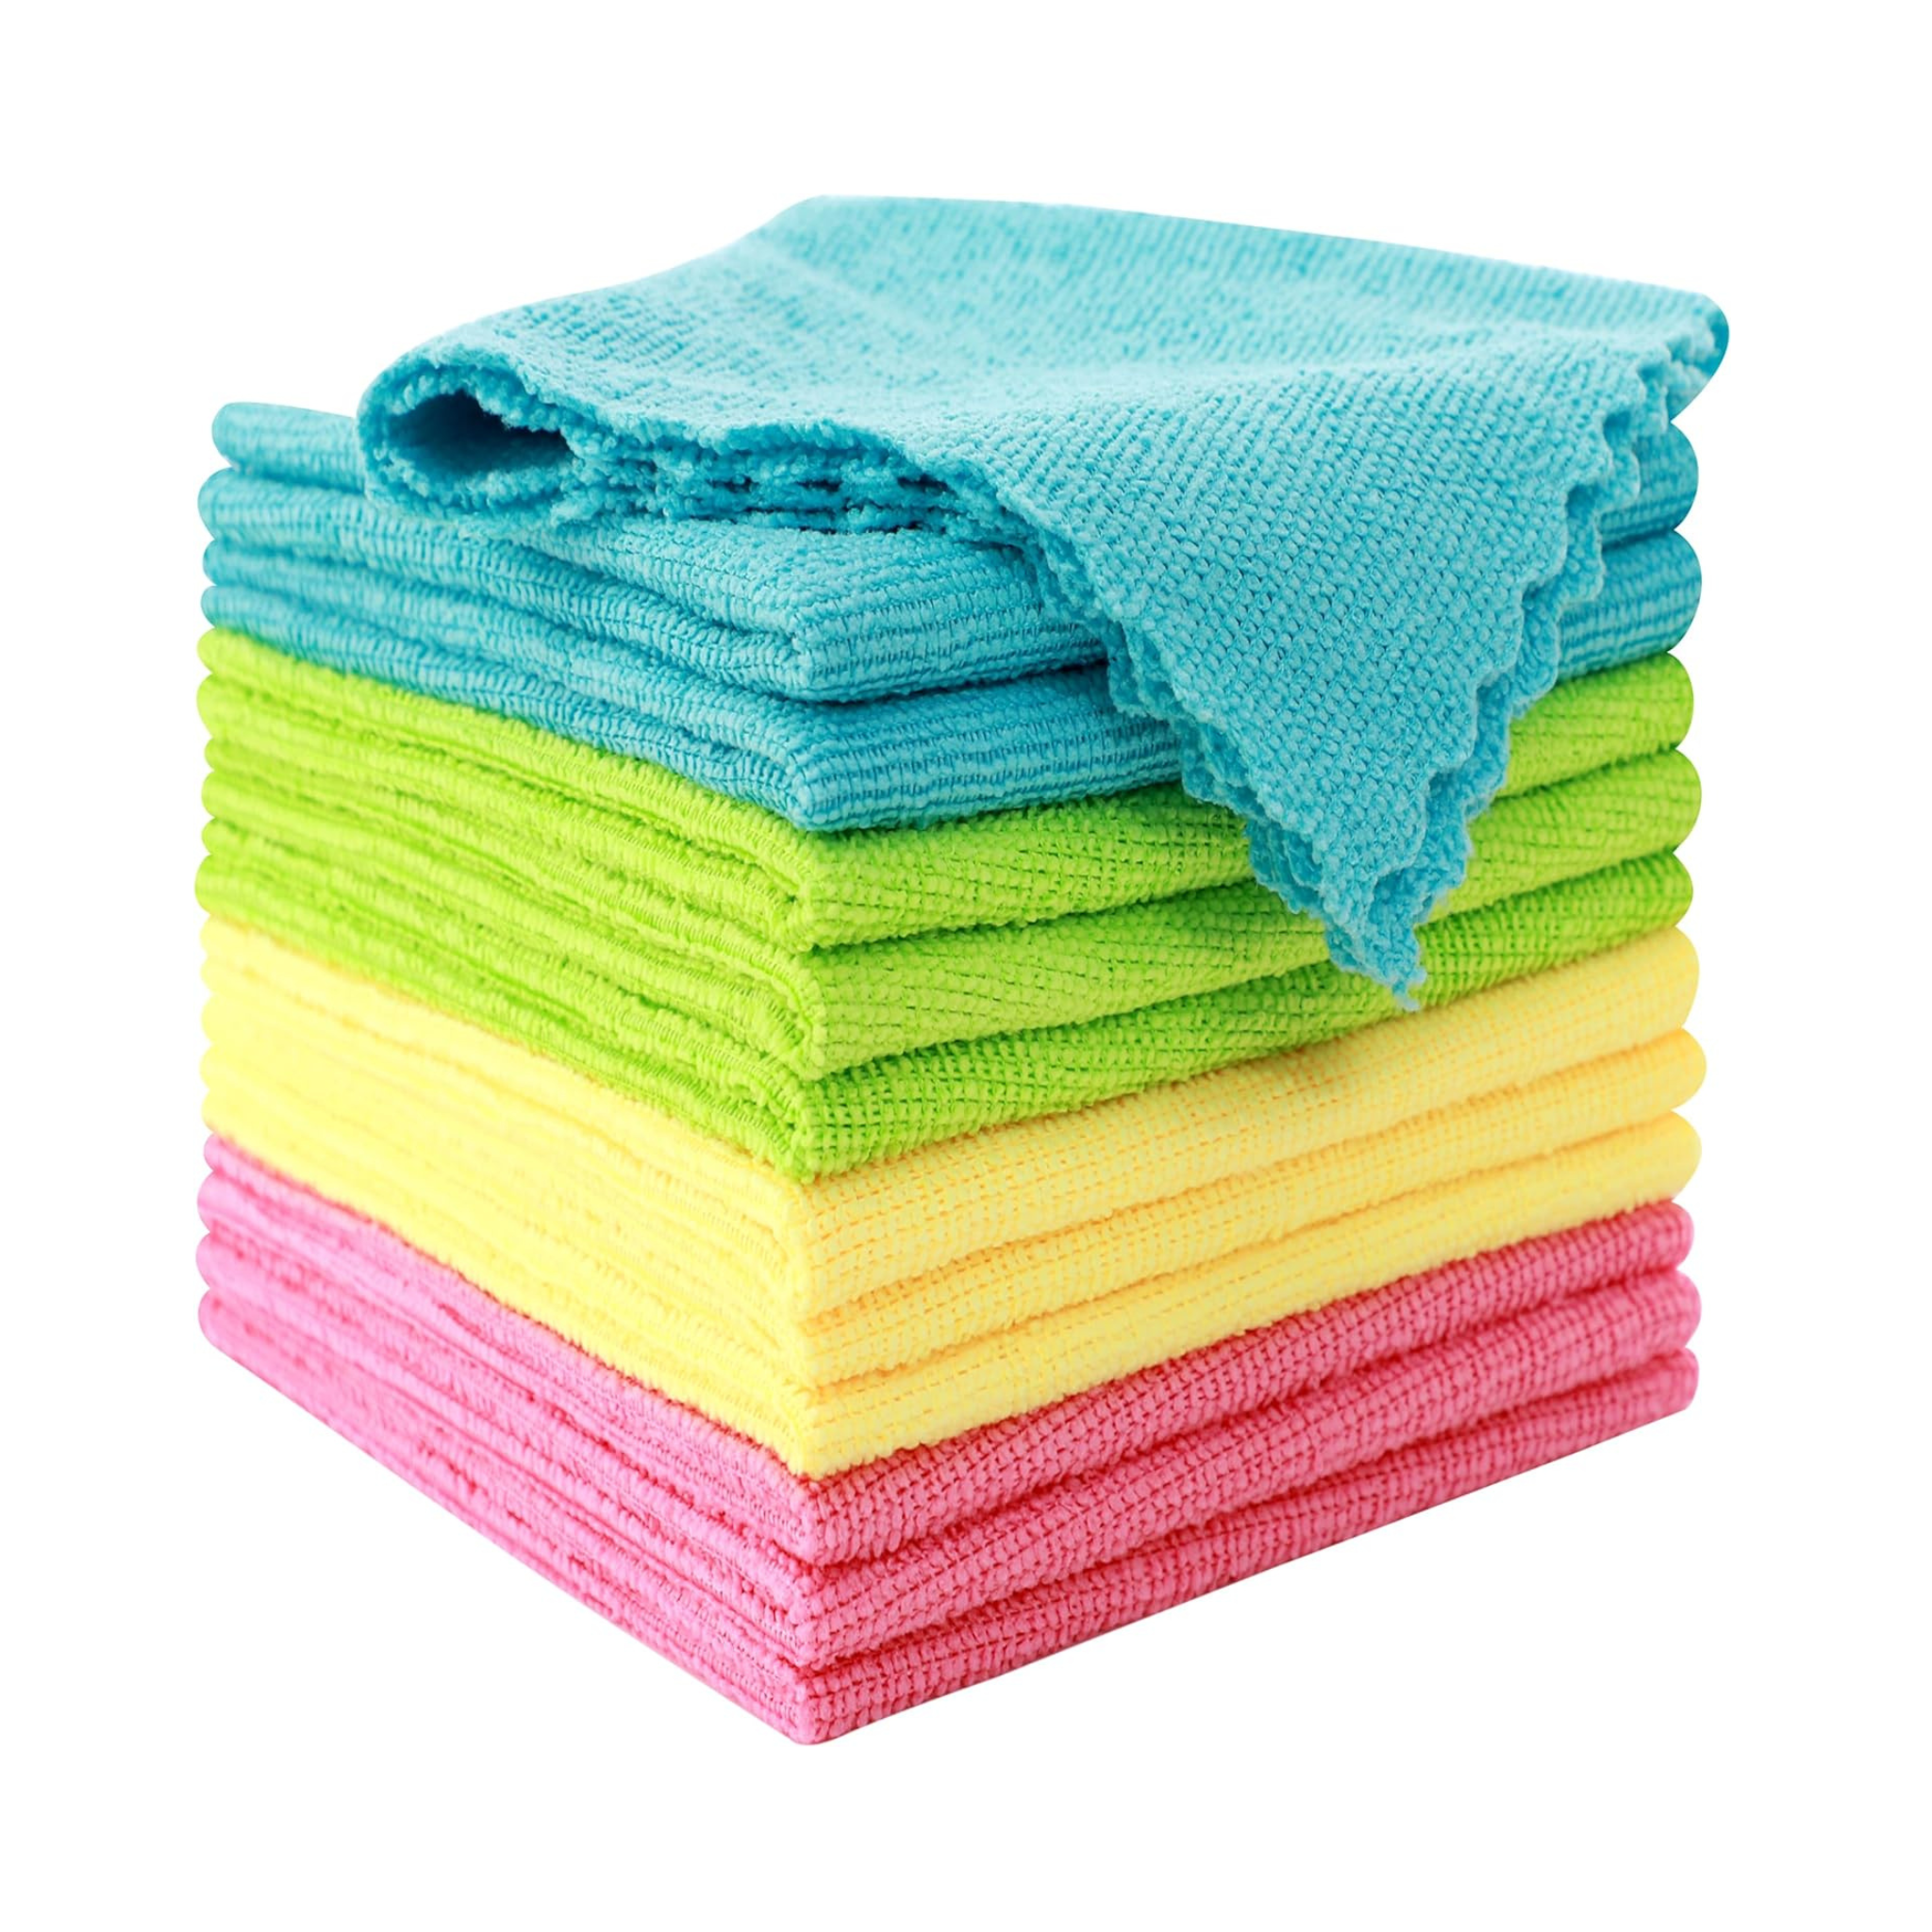 24 Microfiber Cleaning Cloths, 12"X12"